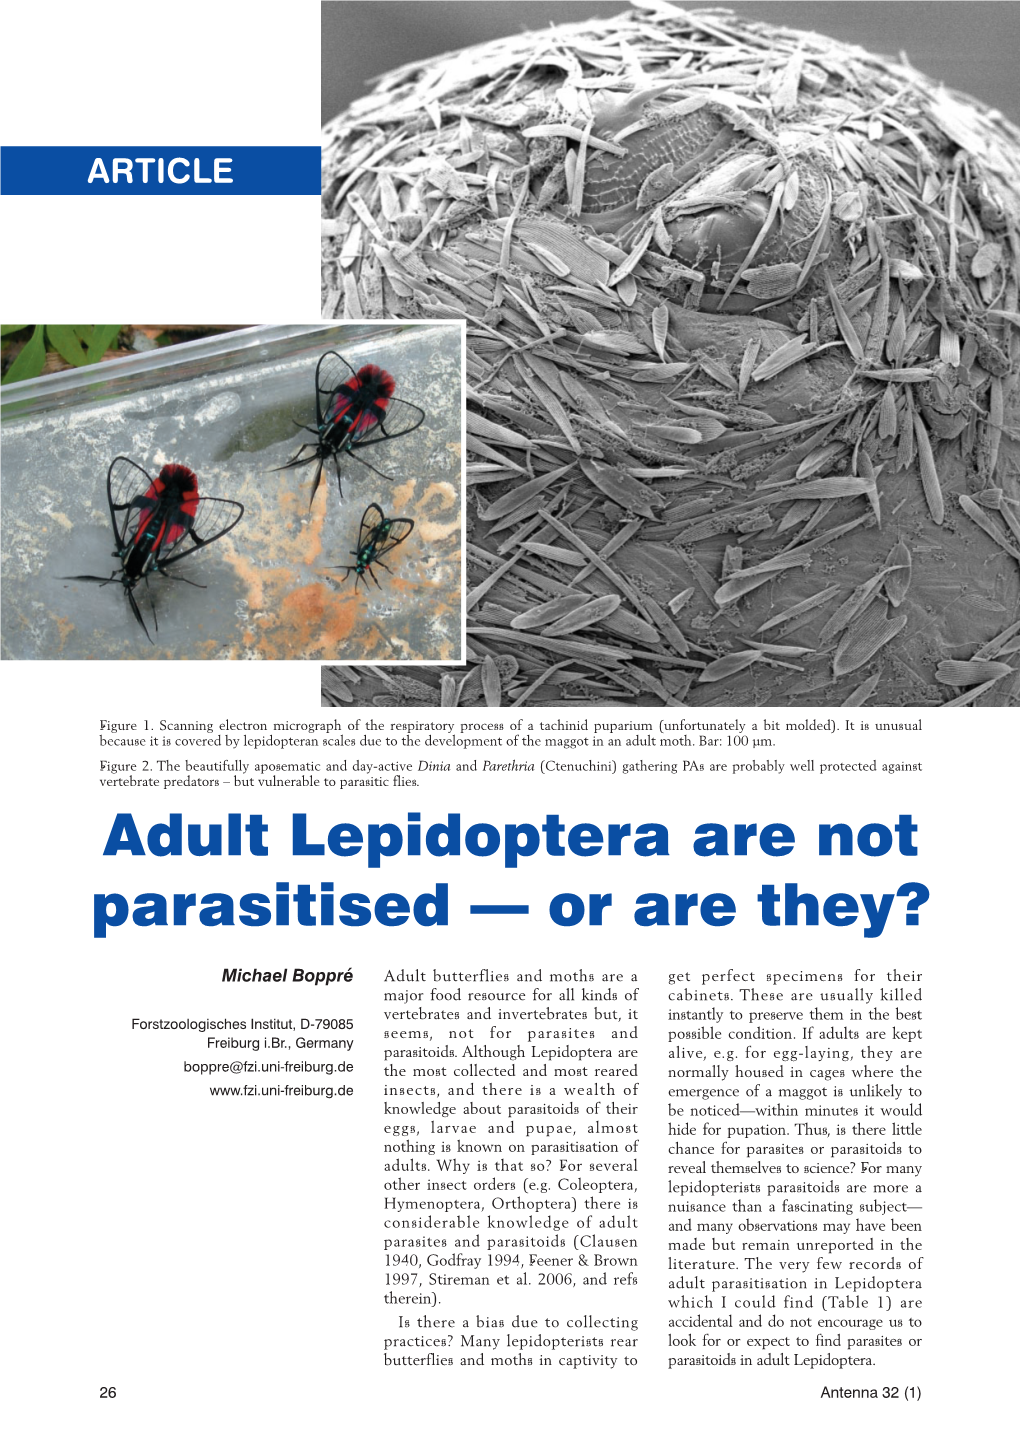 Adult Lepidoptera Are Not Parasitised — Or Are They?